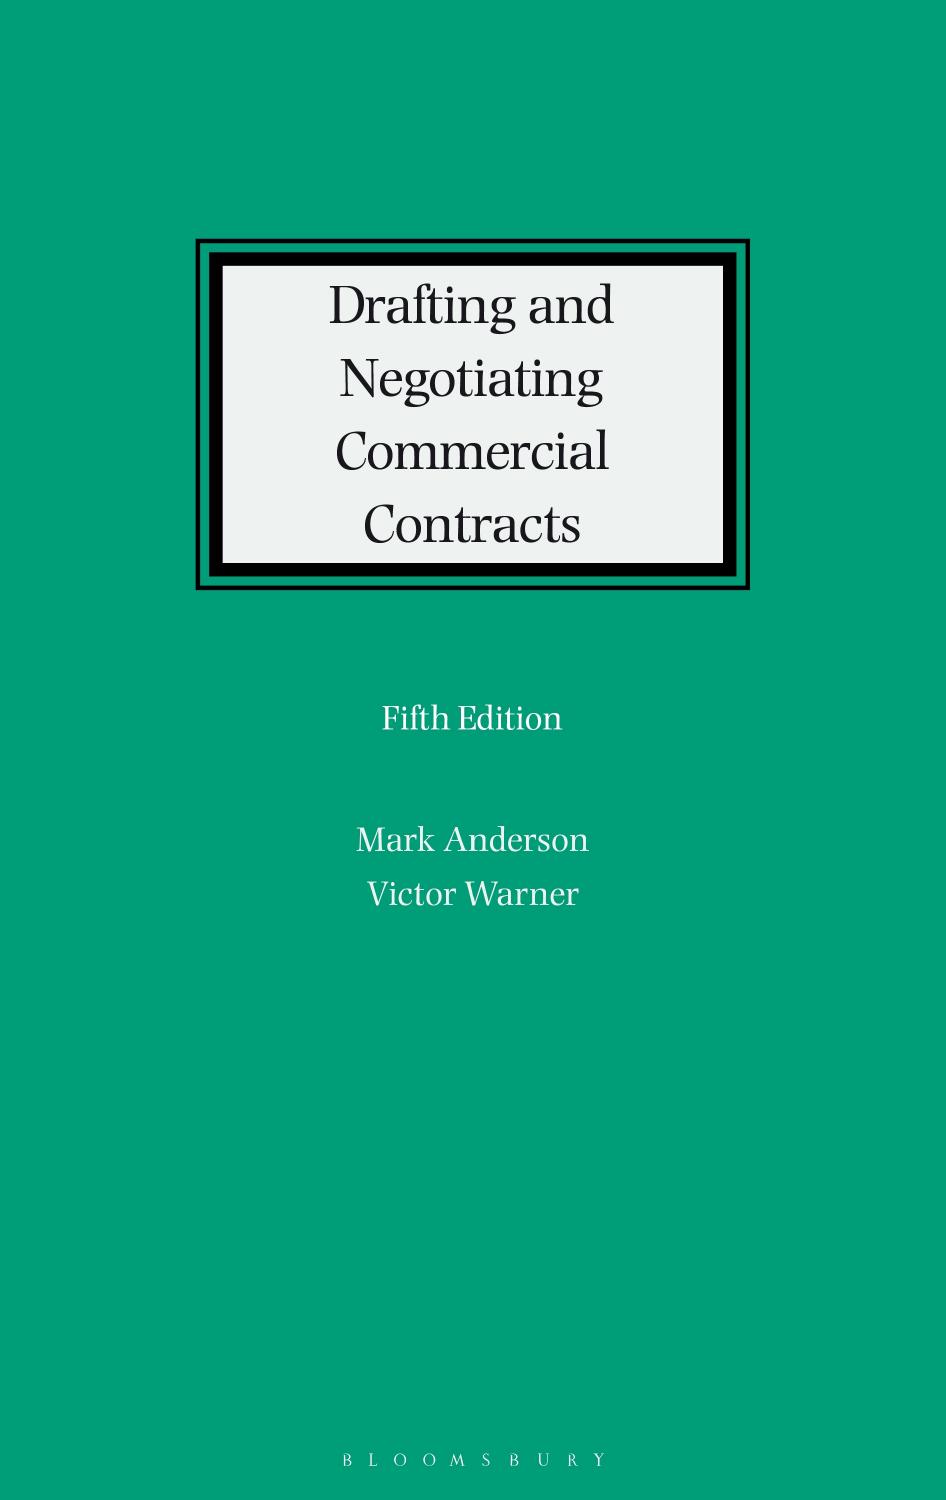 Drafting and Negotiating Commercial Contracts by Mark Anderson Victor Warner